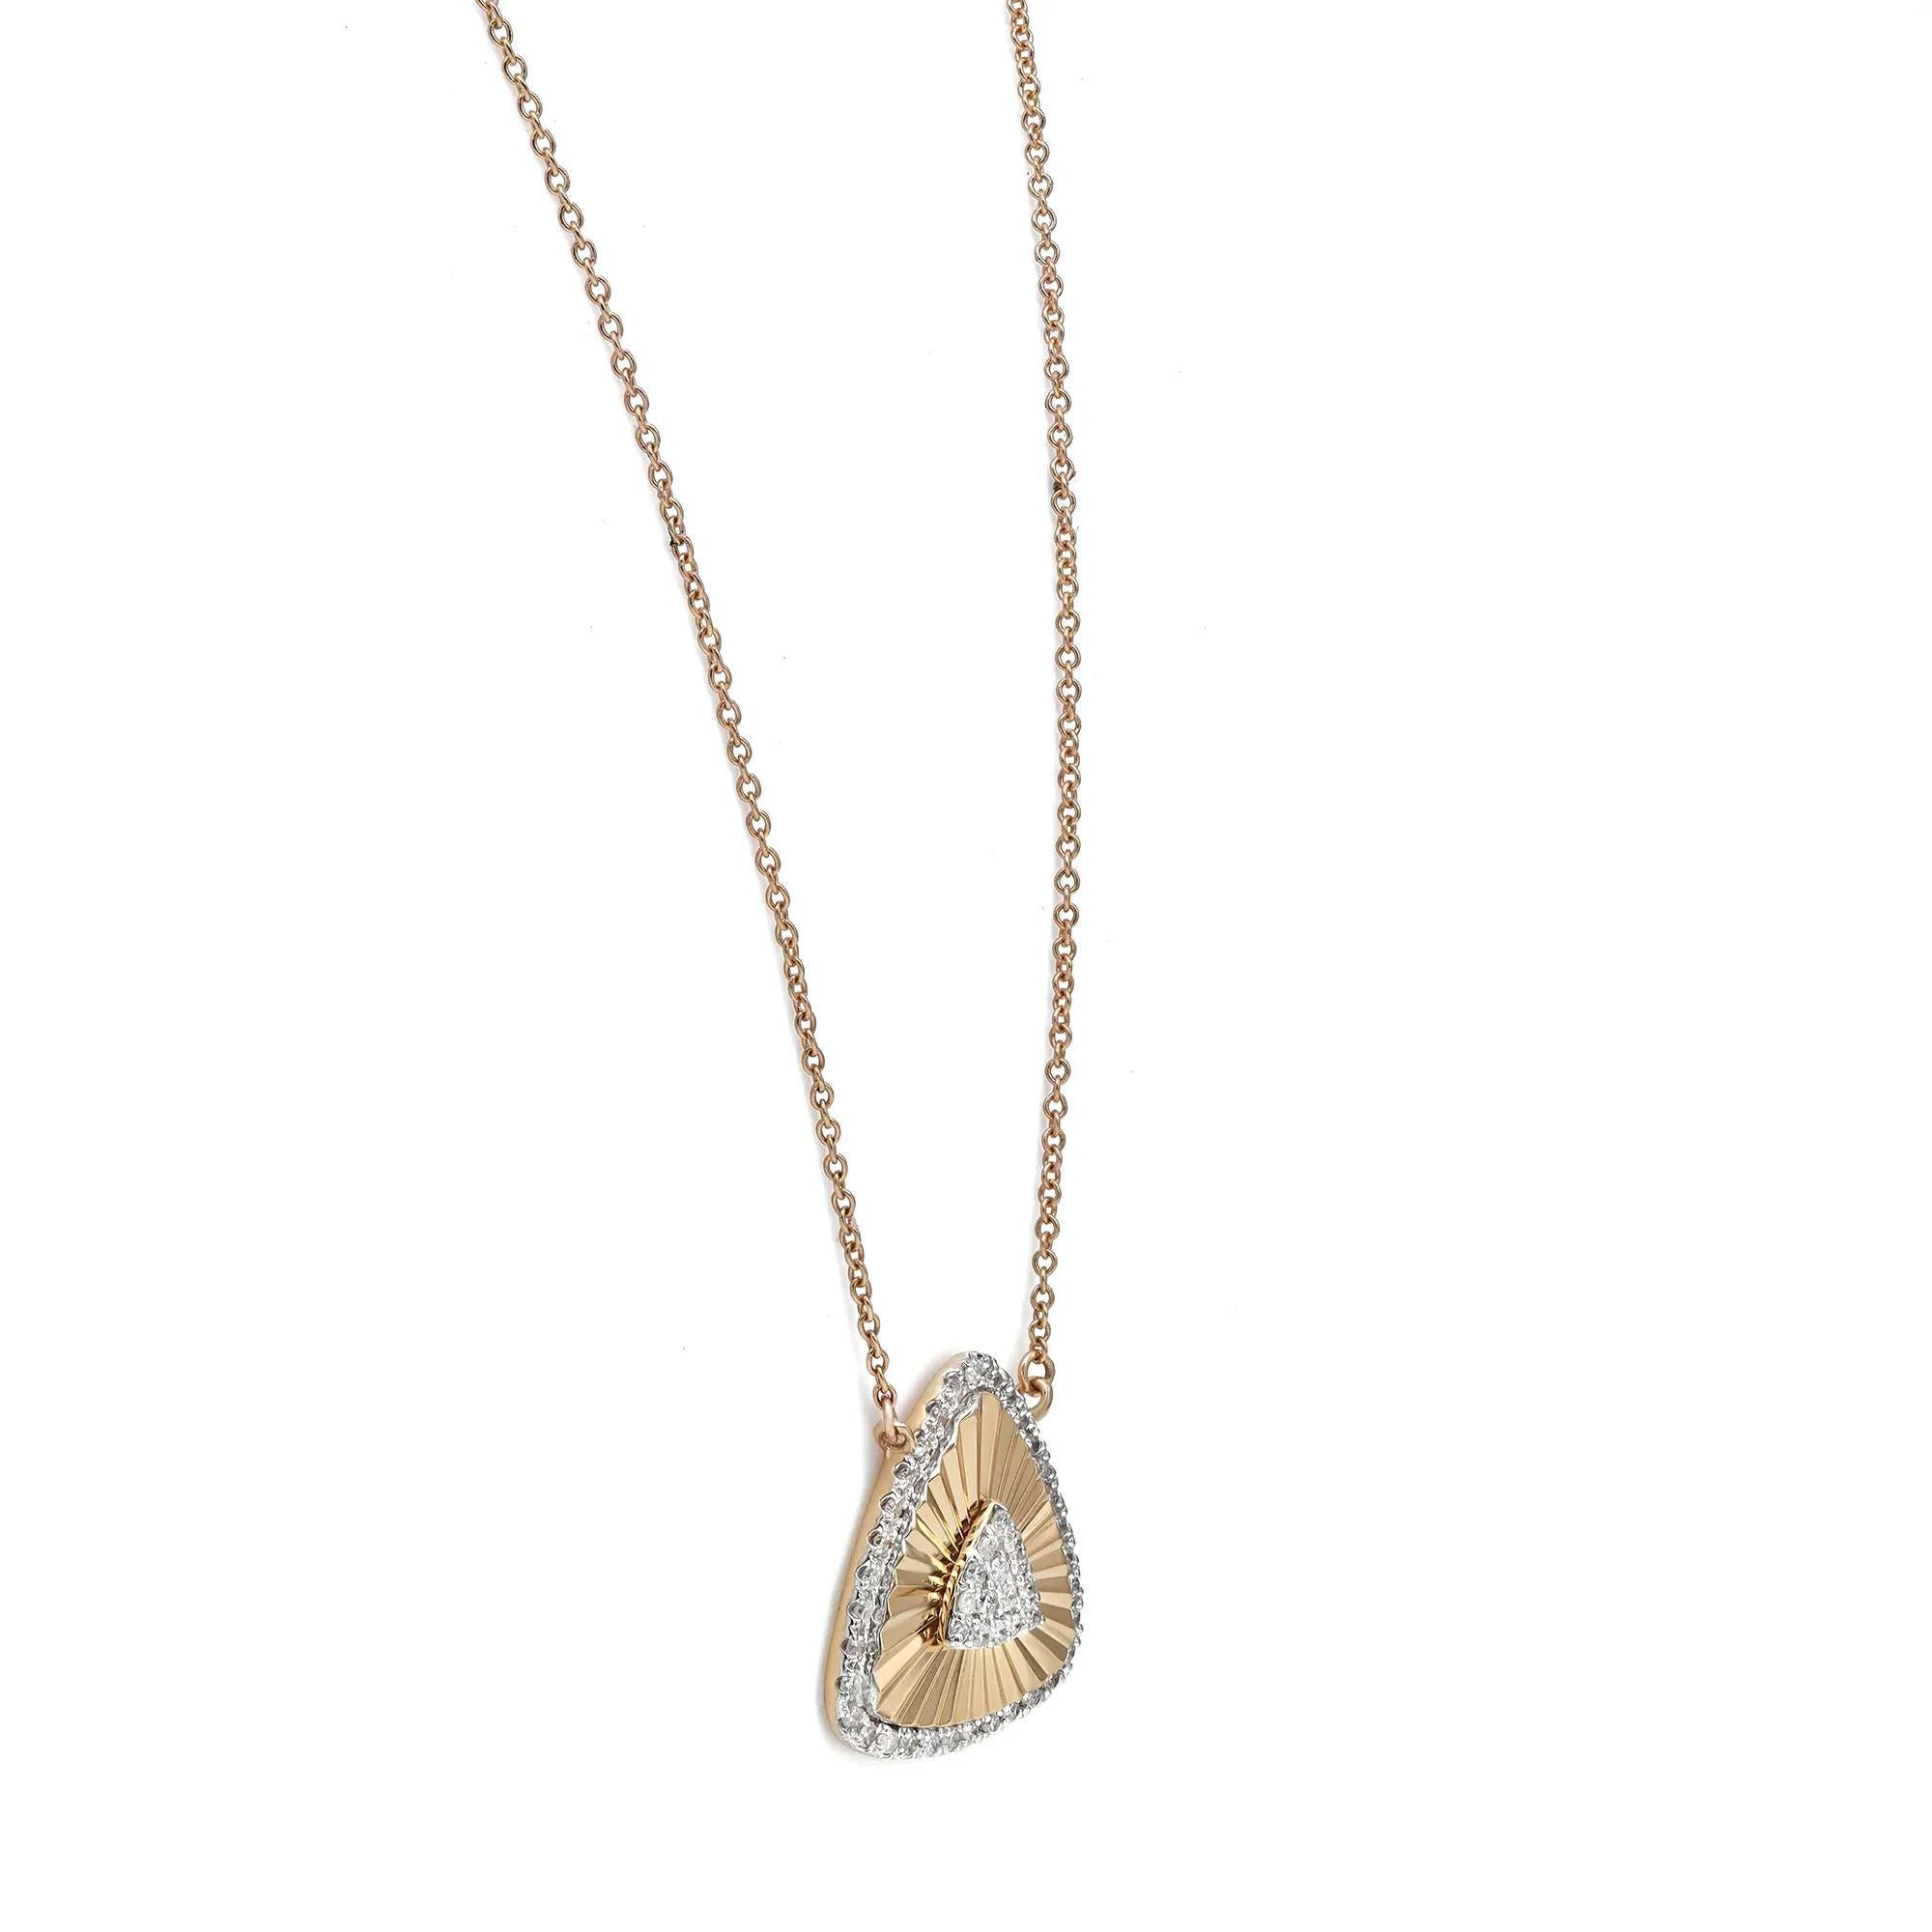 Round Cut Diamond Triangular Pendant Necklace 14K Yellow Gold 18 Inches In New Condition For Sale In New York, NY